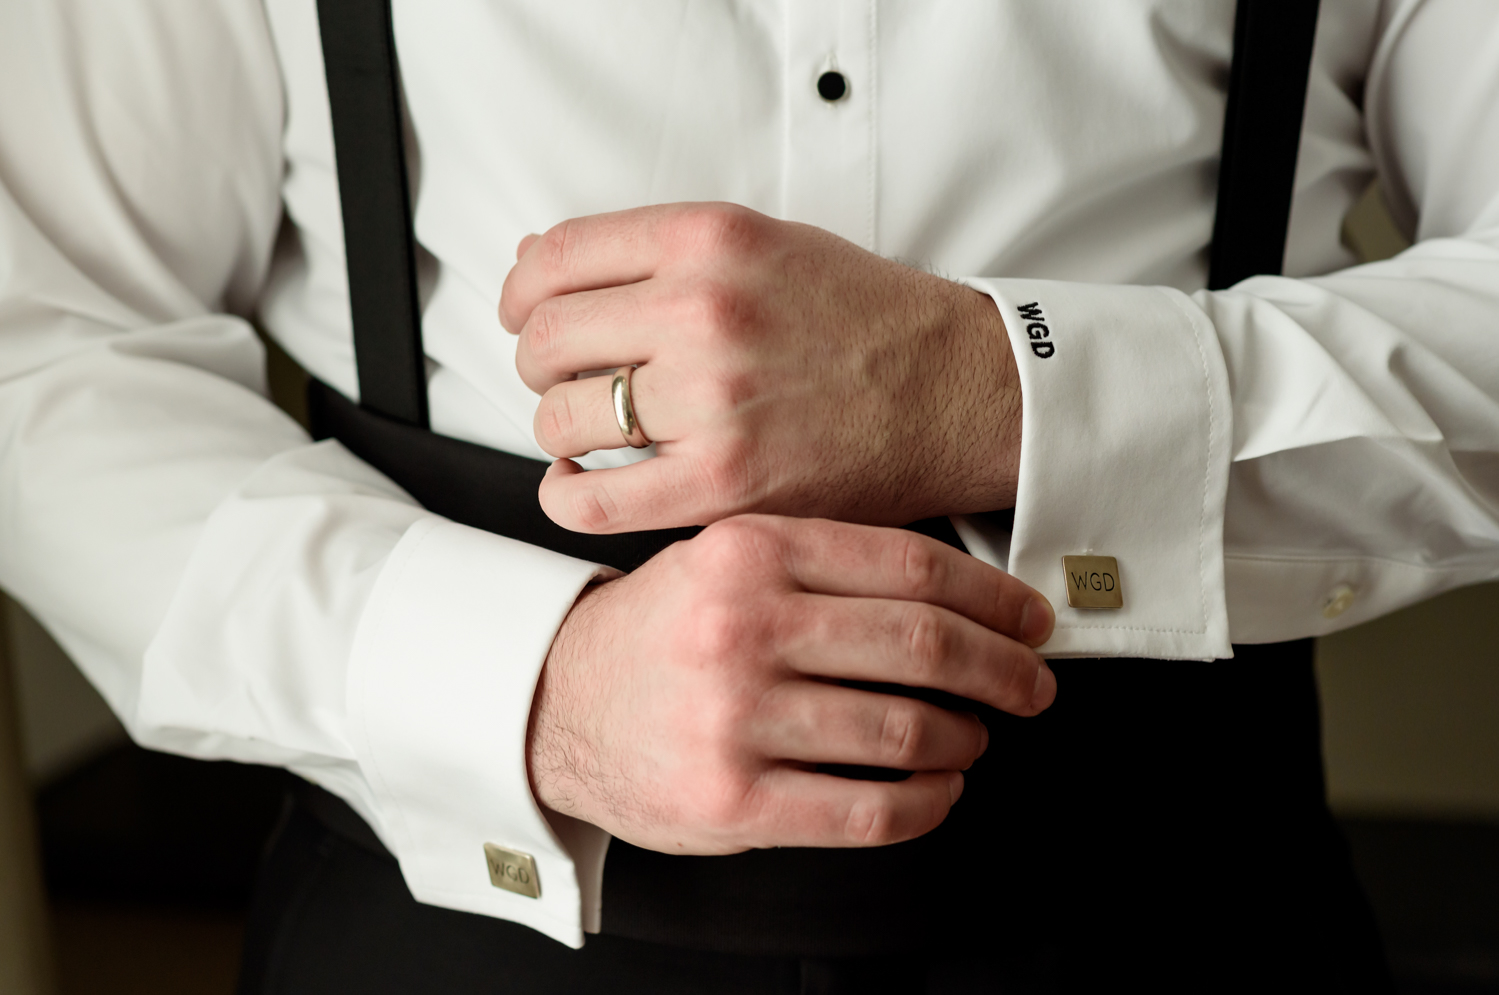 A close up of the grooms hands, showing off his wedding ring, monogrammed dress shirt, and monogrammed cuff links.